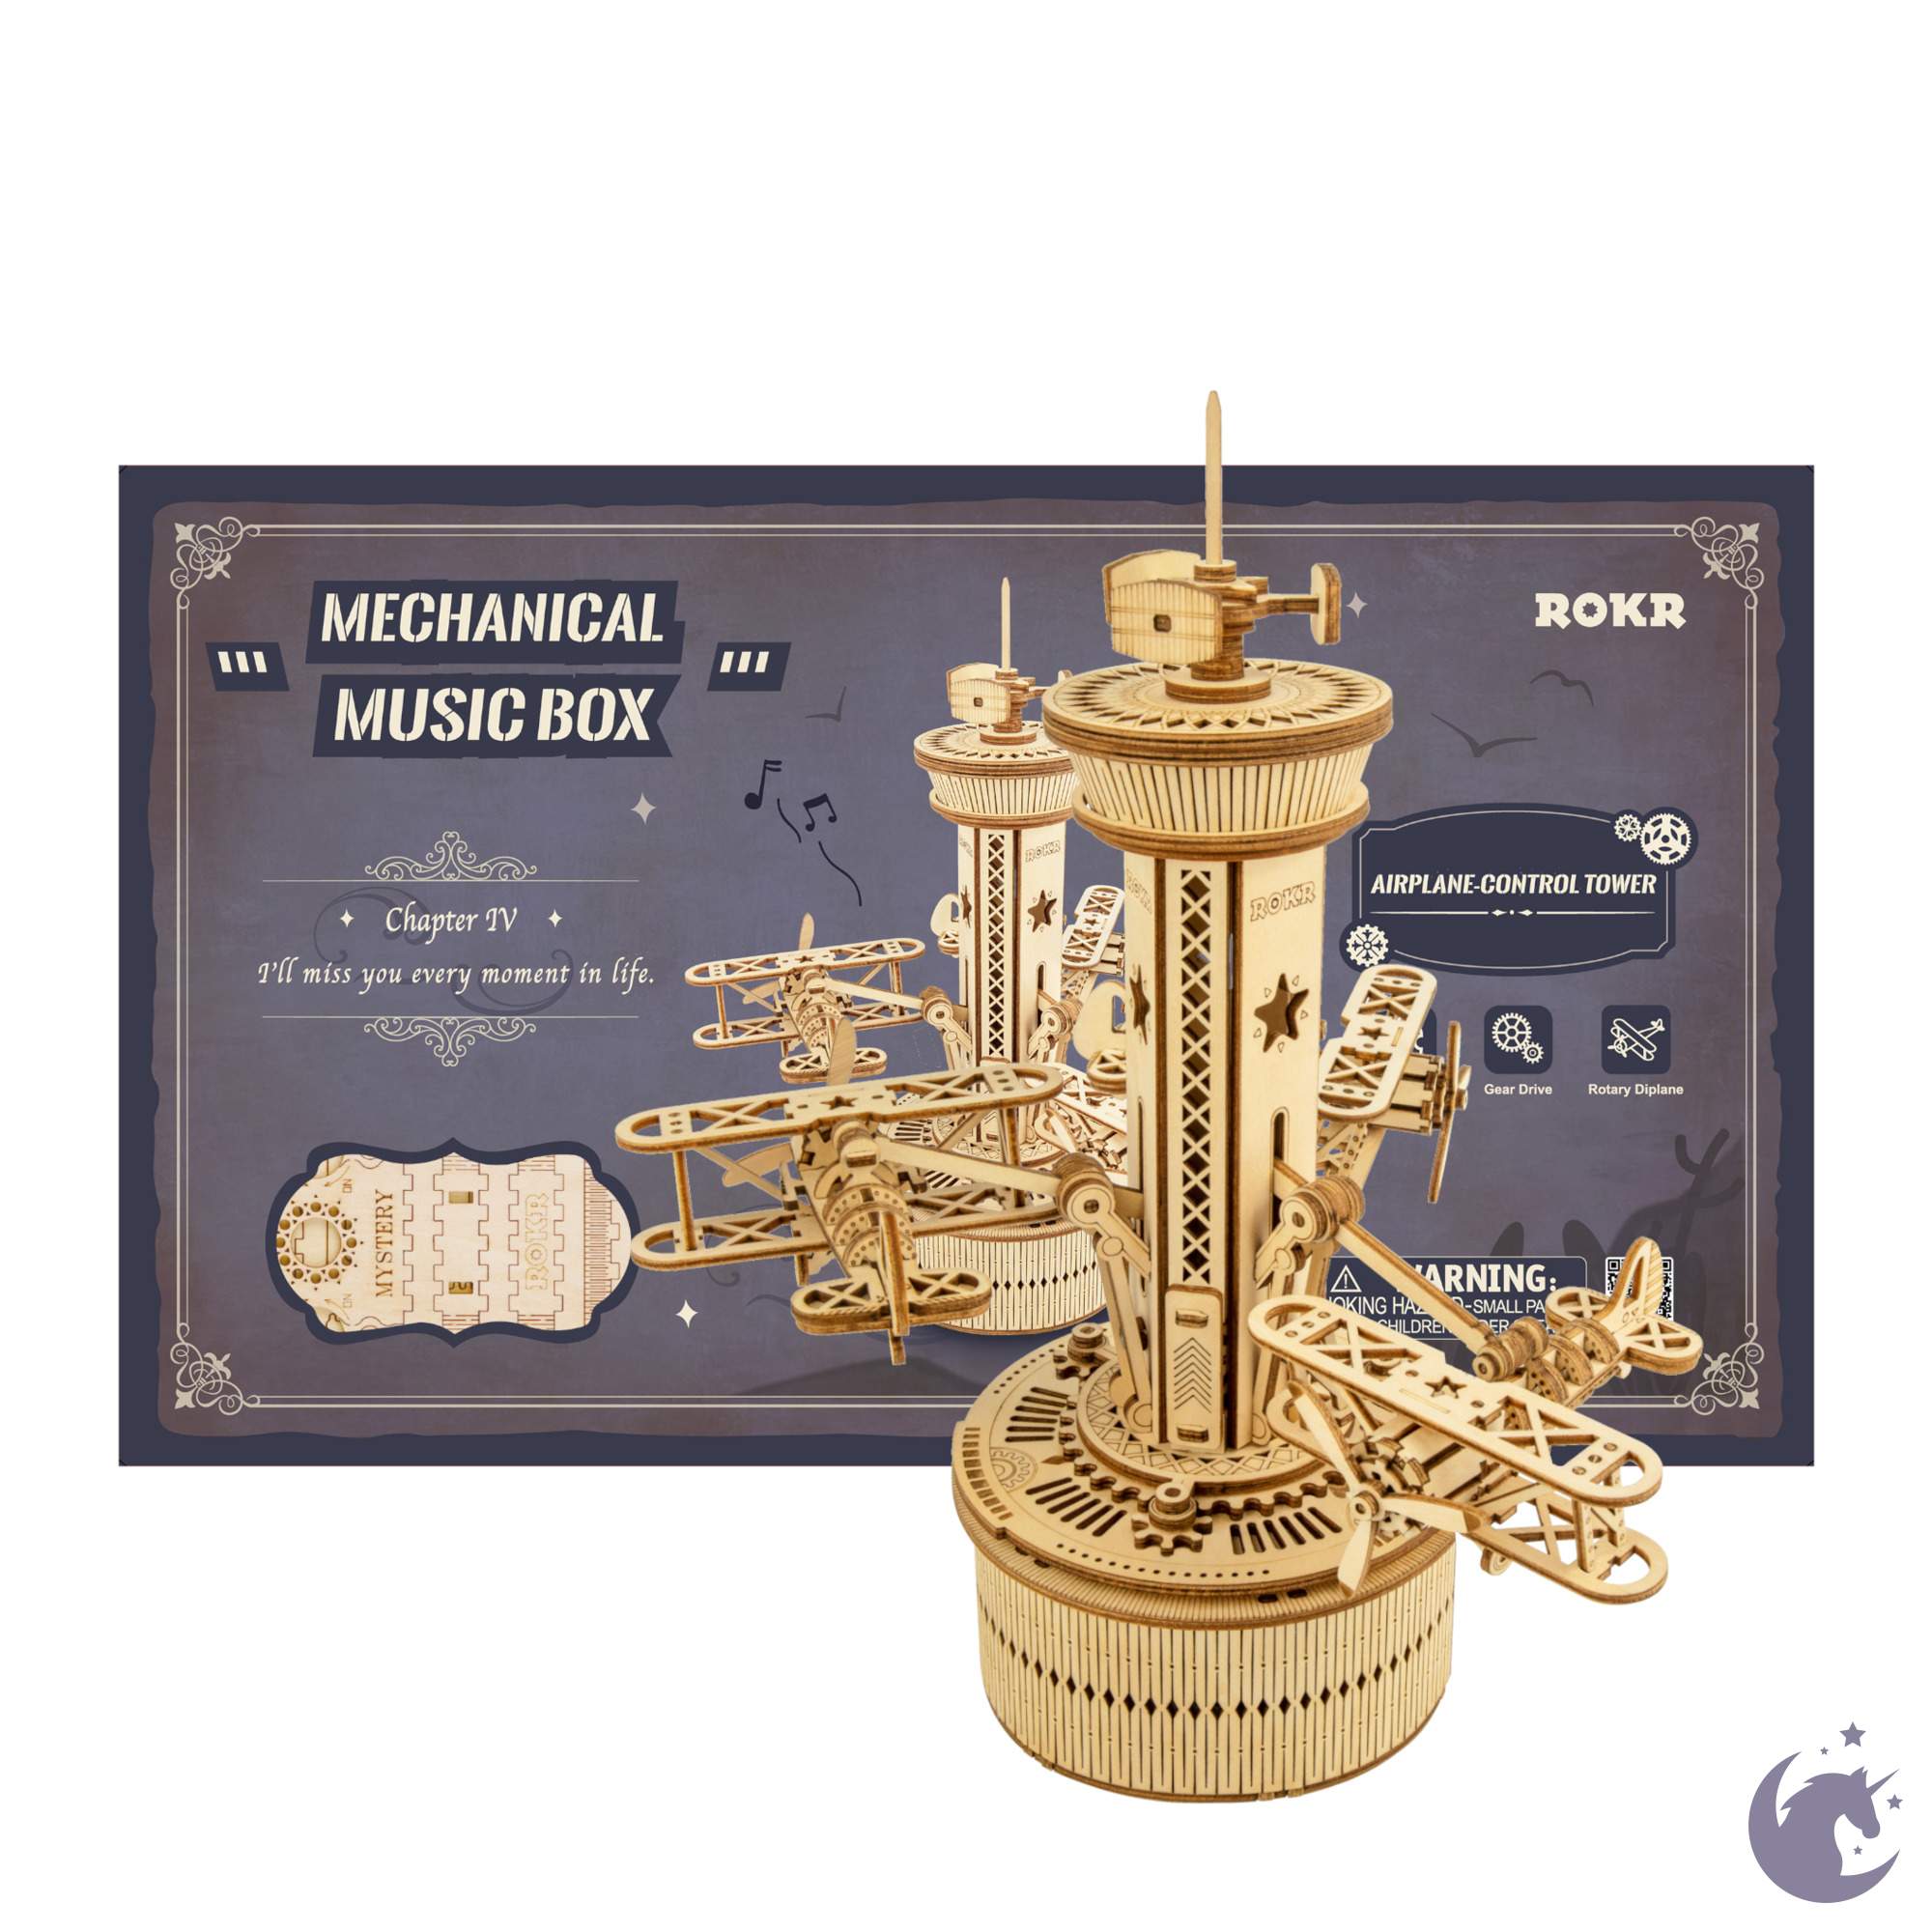 unicorntoys_robotime_rokr_diy_mechanical_music_box_3D_wooden_puzzle_game_assembly_model_building_kits_engineering_toys_for_Teens_AMK_41_5_054d6502-dc22-459f-9e48-b37bc62ae21b.jpg